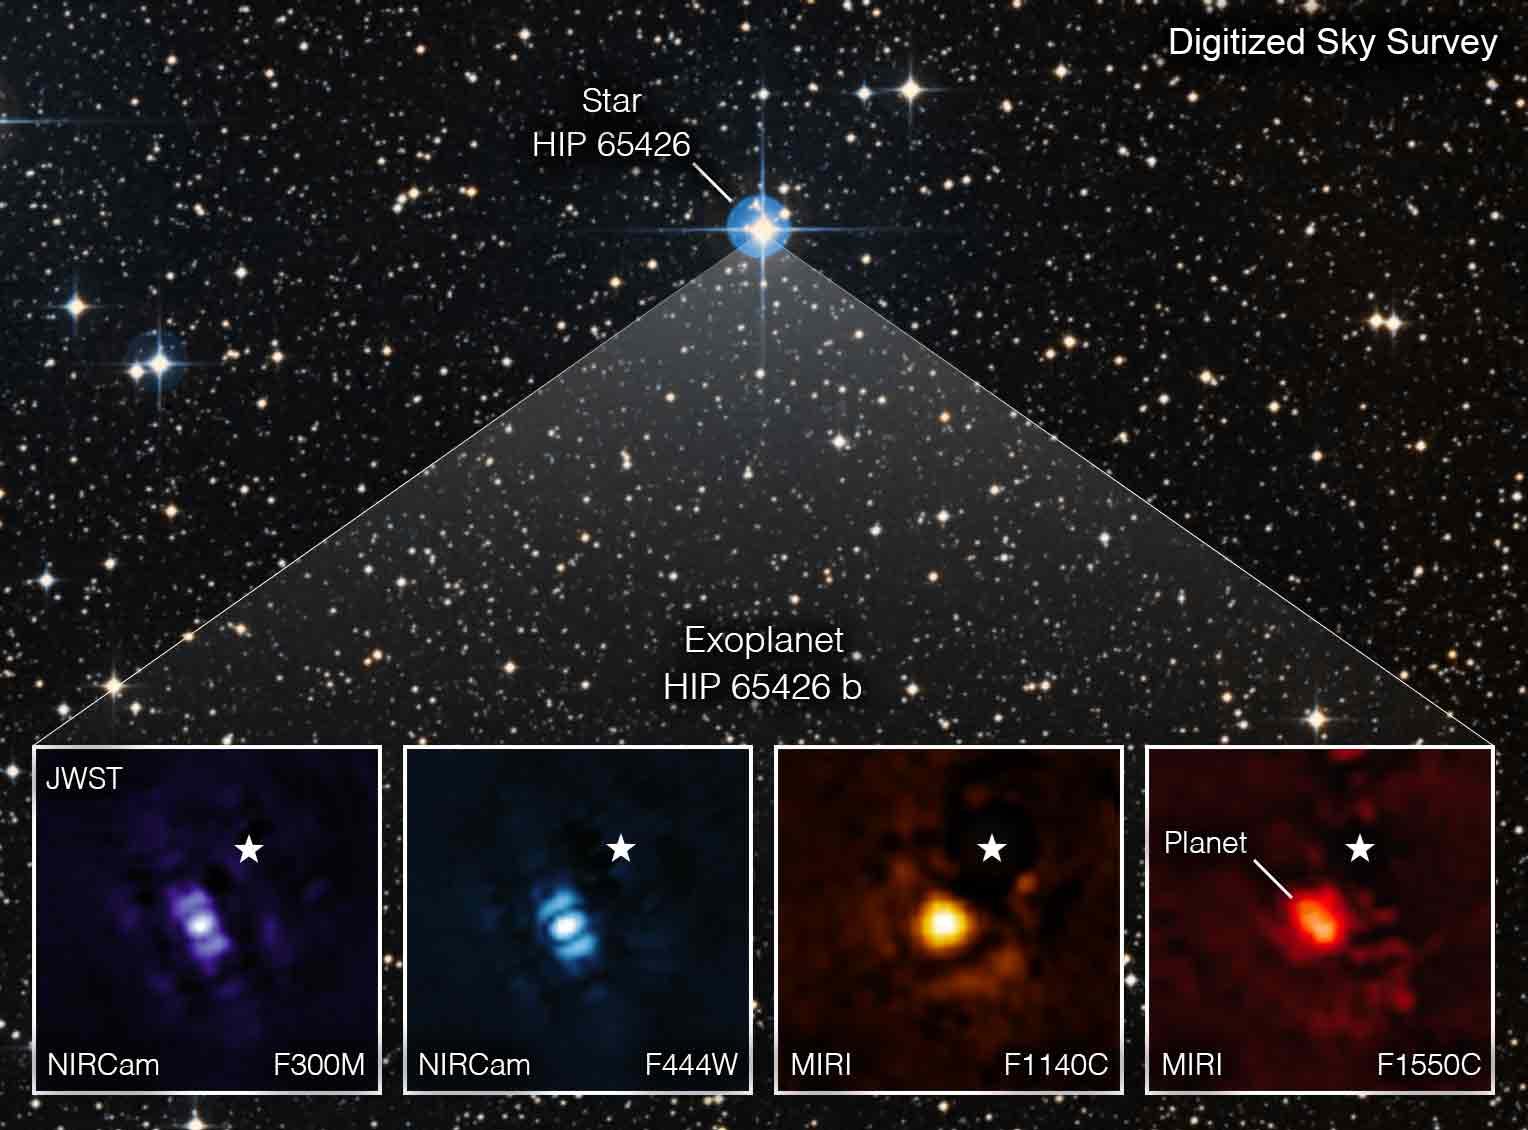 The exoplanet appears as a white disk with a triangle of light emanating from it; the four alternate images at the bottom of the image each appear as different colored blurs